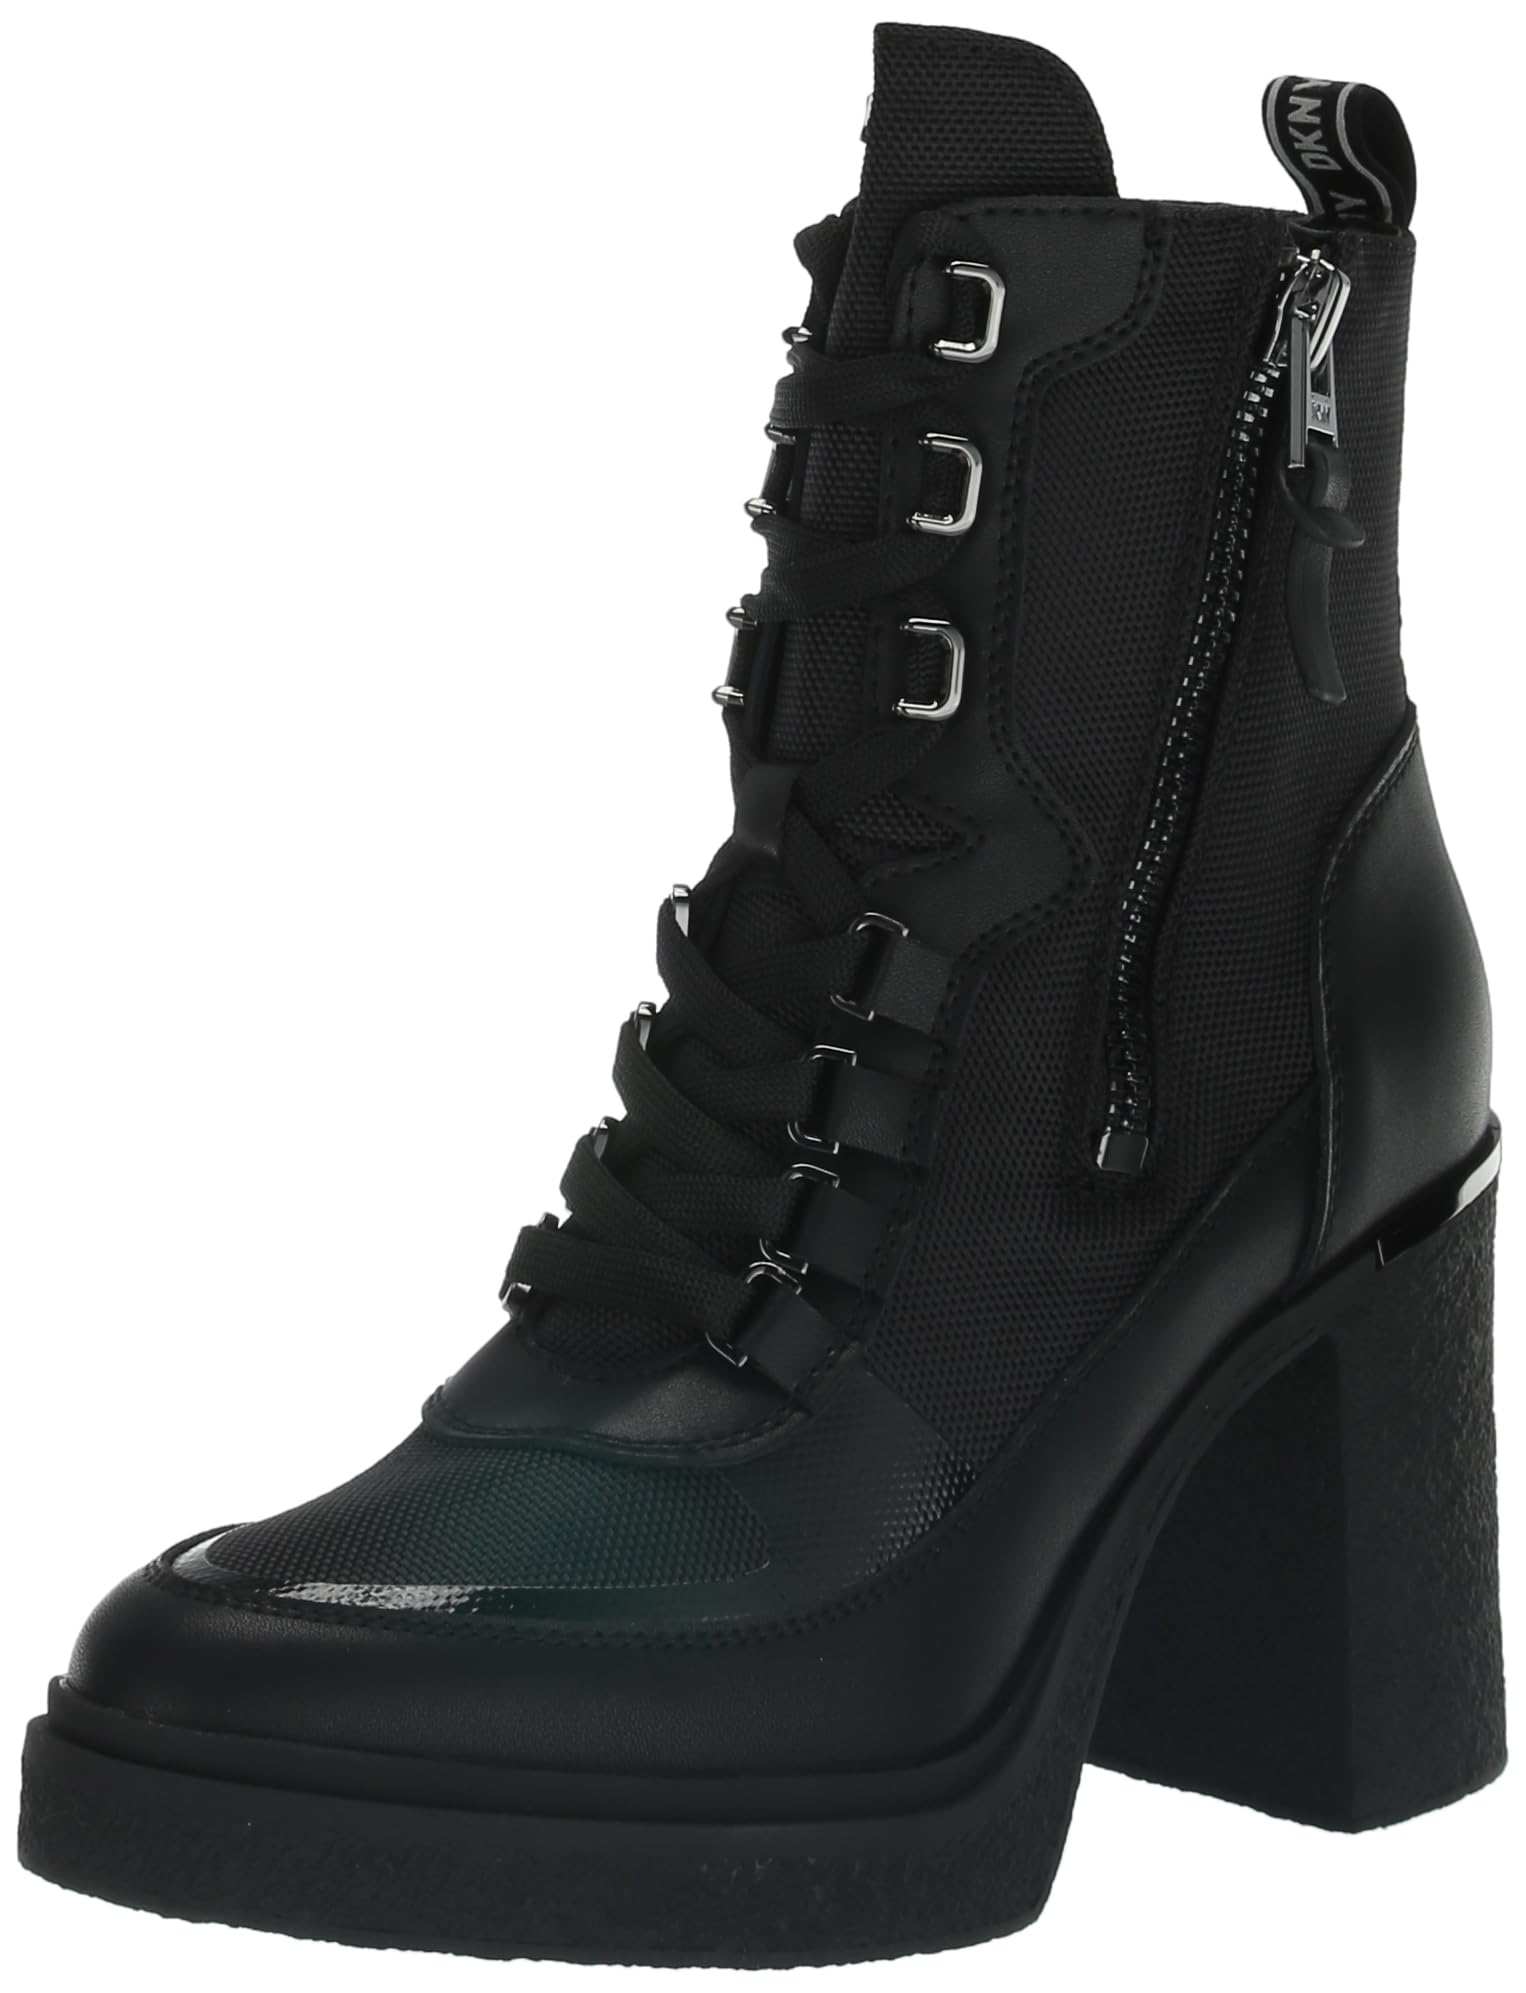 DKNY Women's Toia-Lace Up Boot Combat